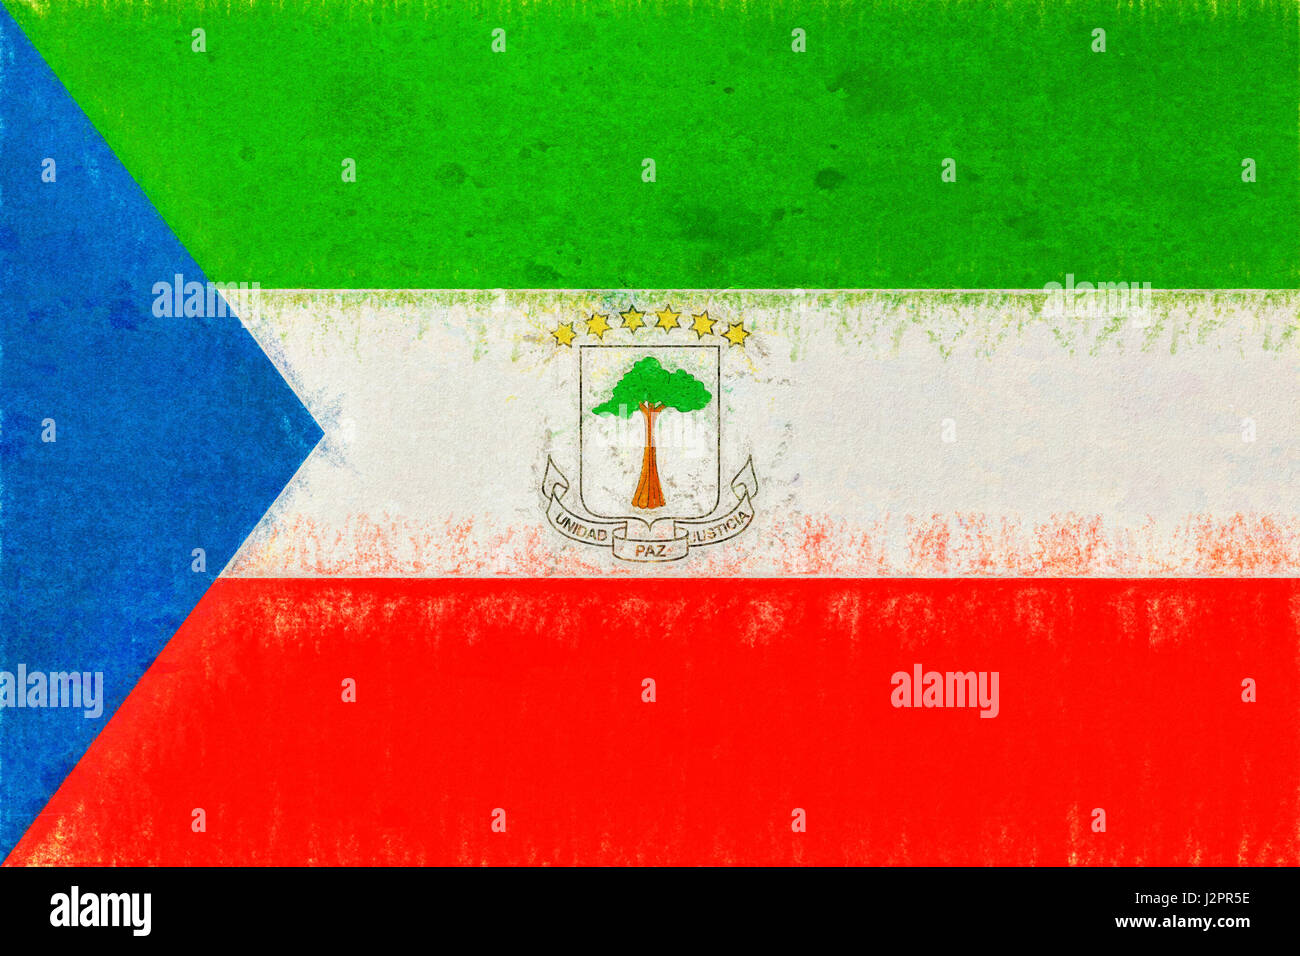 Illustration of the national flag of Equatorial Guinea with a grunge look. Stock Photo